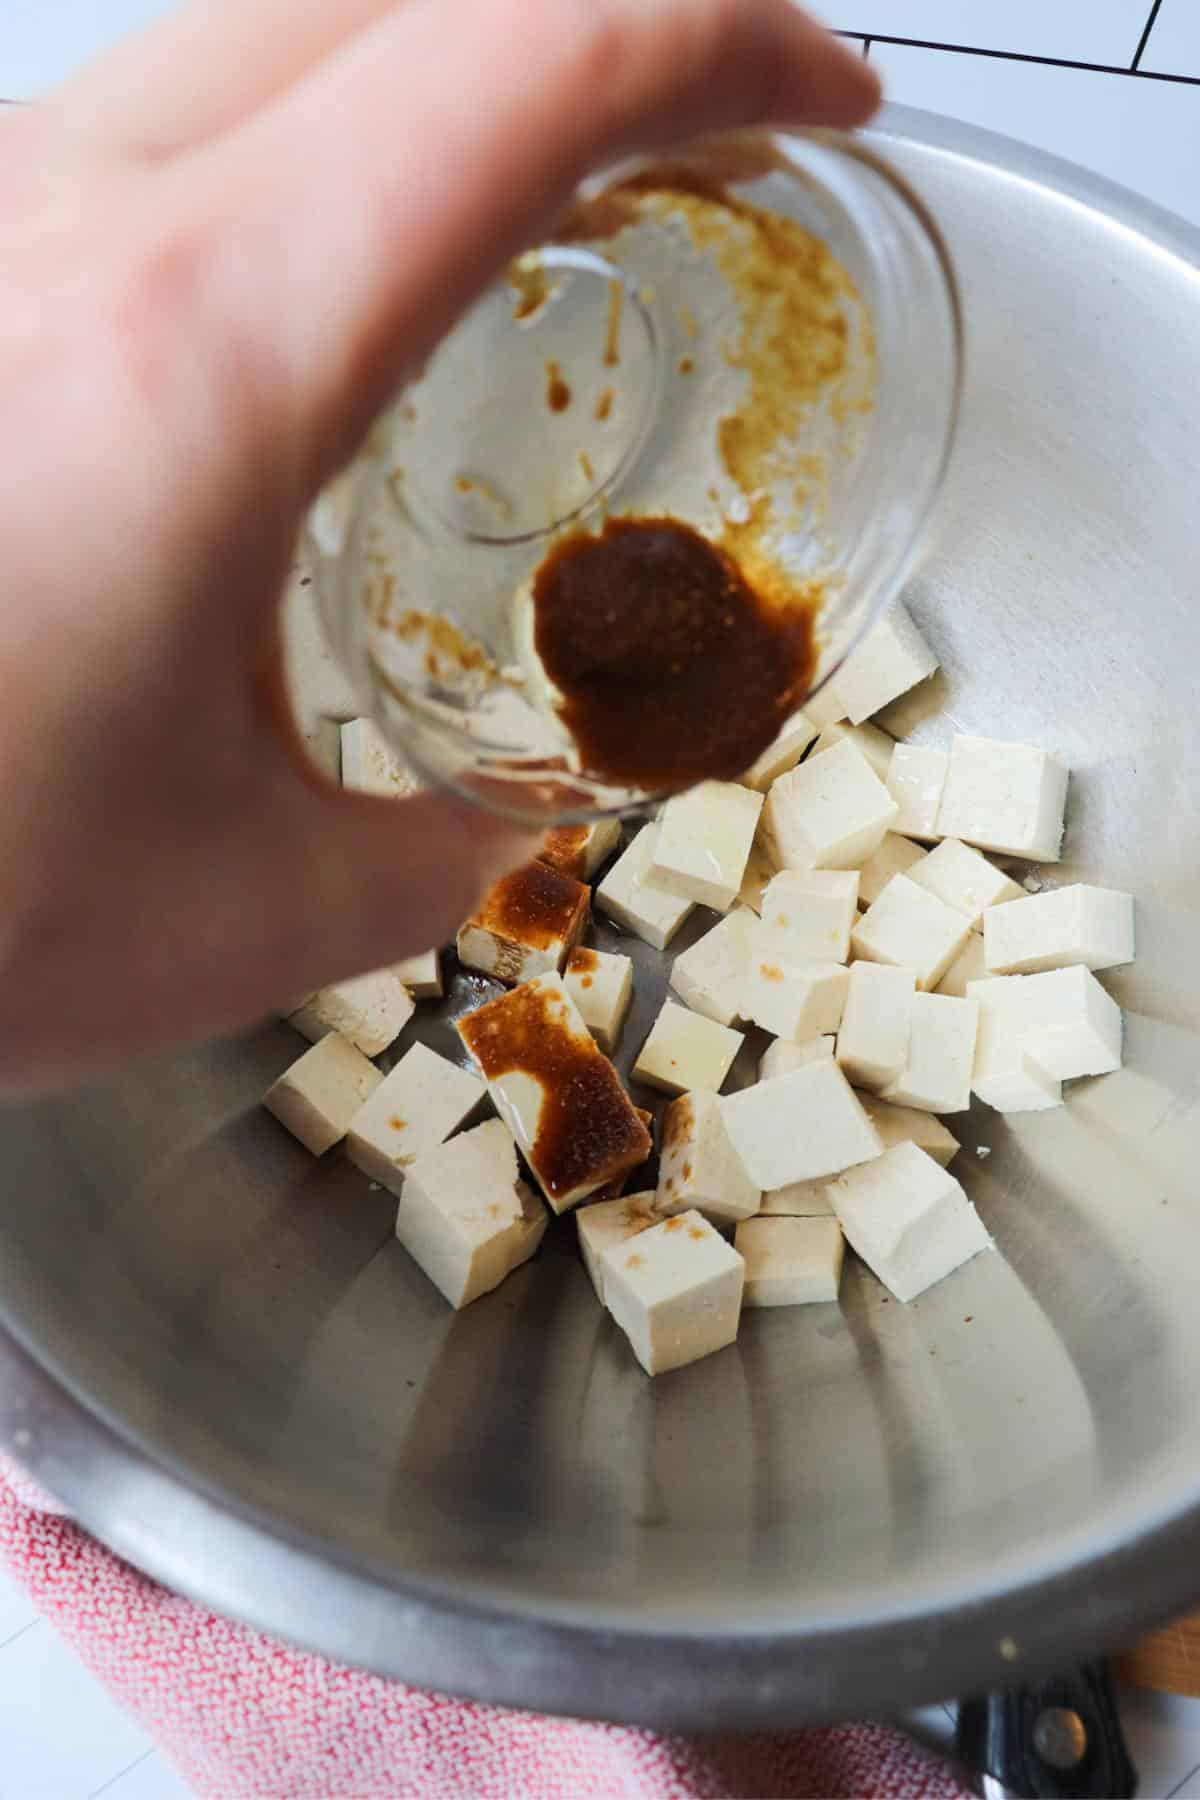 Tofu cubes in a mixing bowl with soy sauce getting drizzled on them.